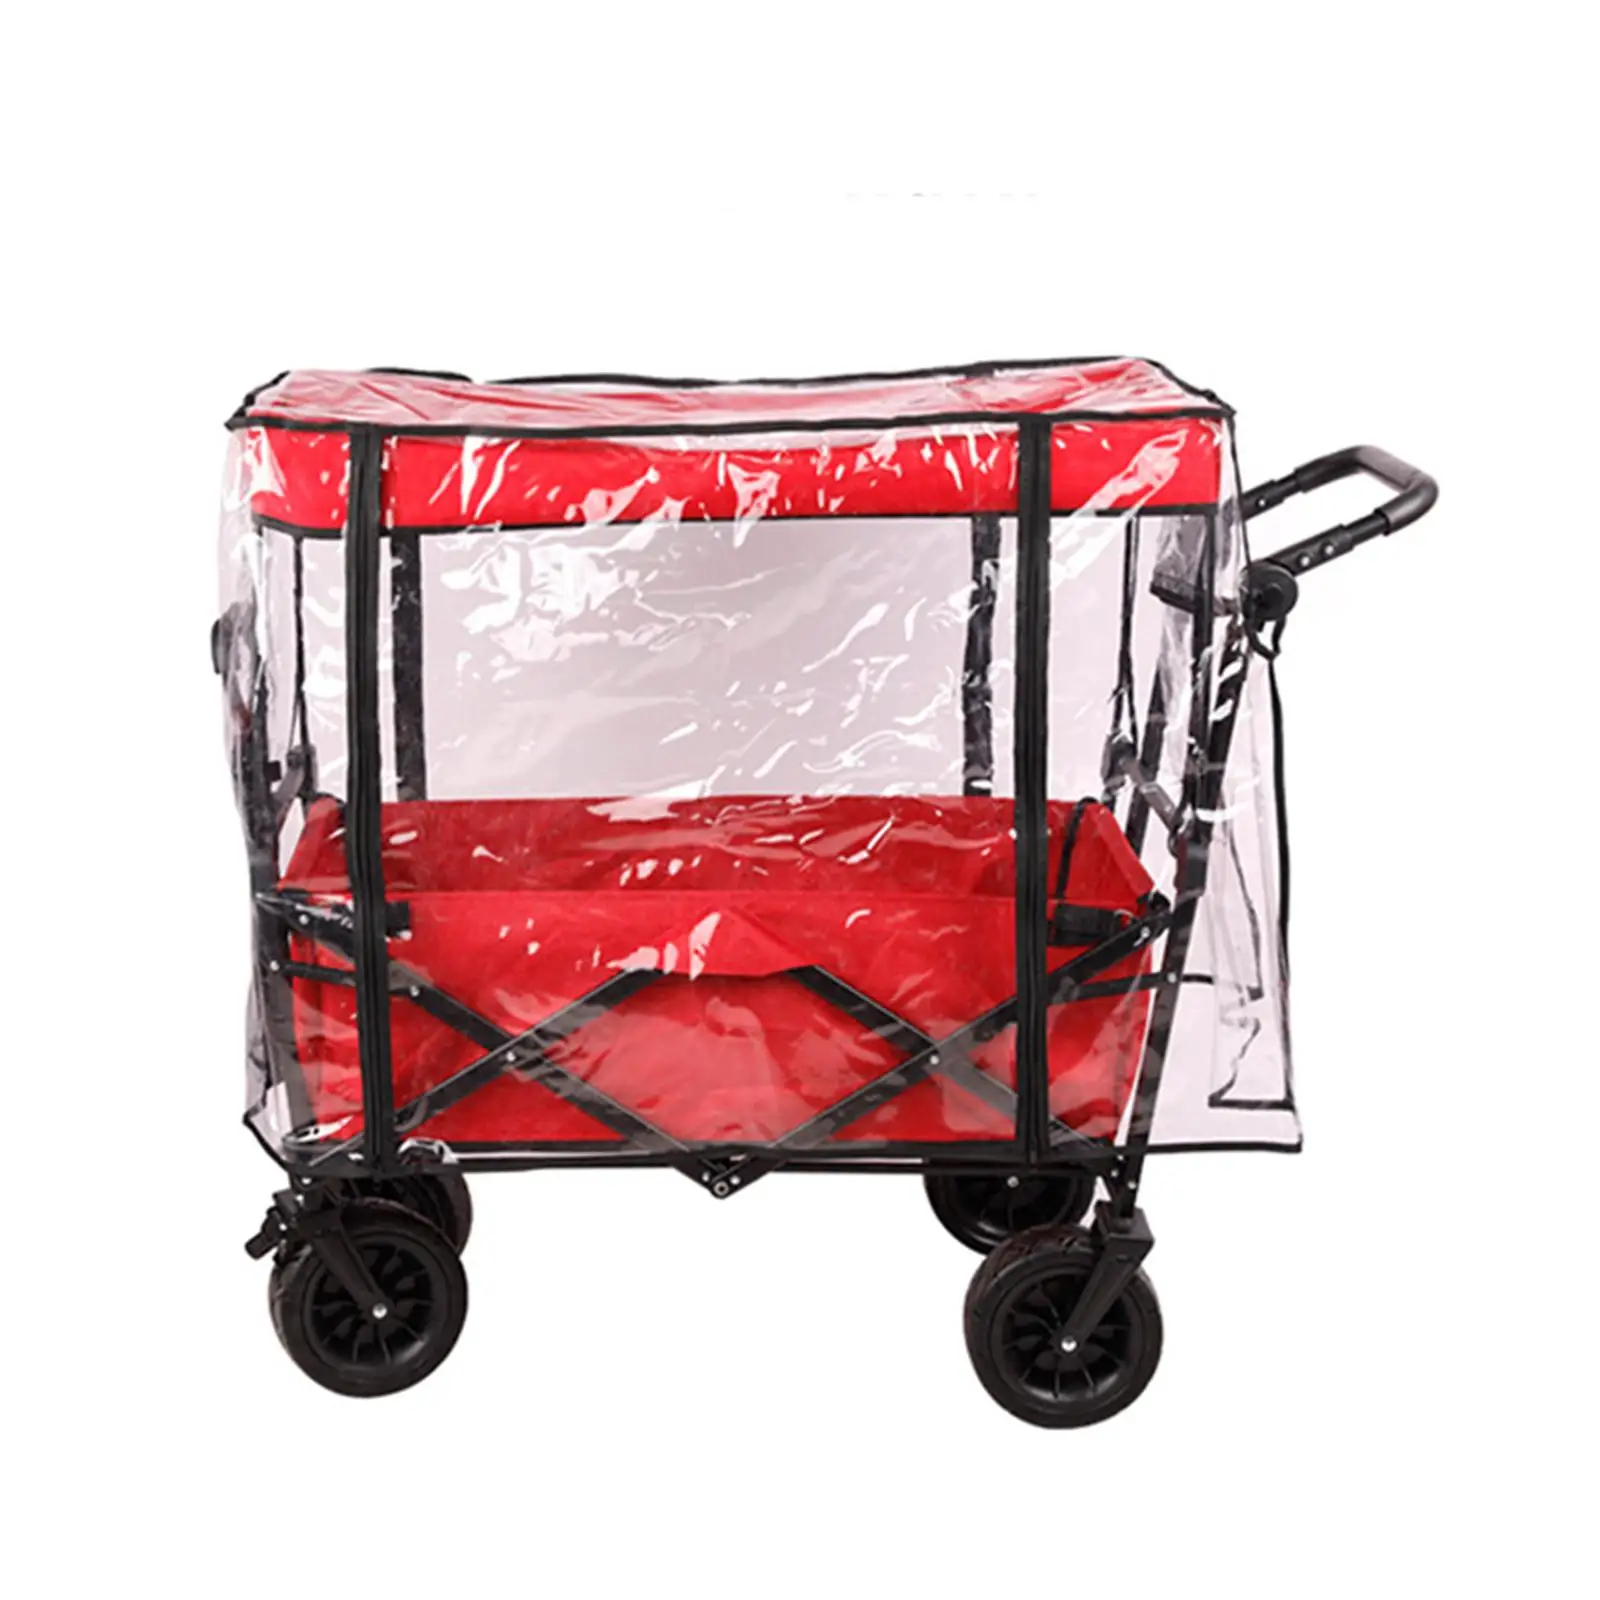 Push Pull Wagon Rain Cover Clear Trolley Cart Cover for Outdoor Garden